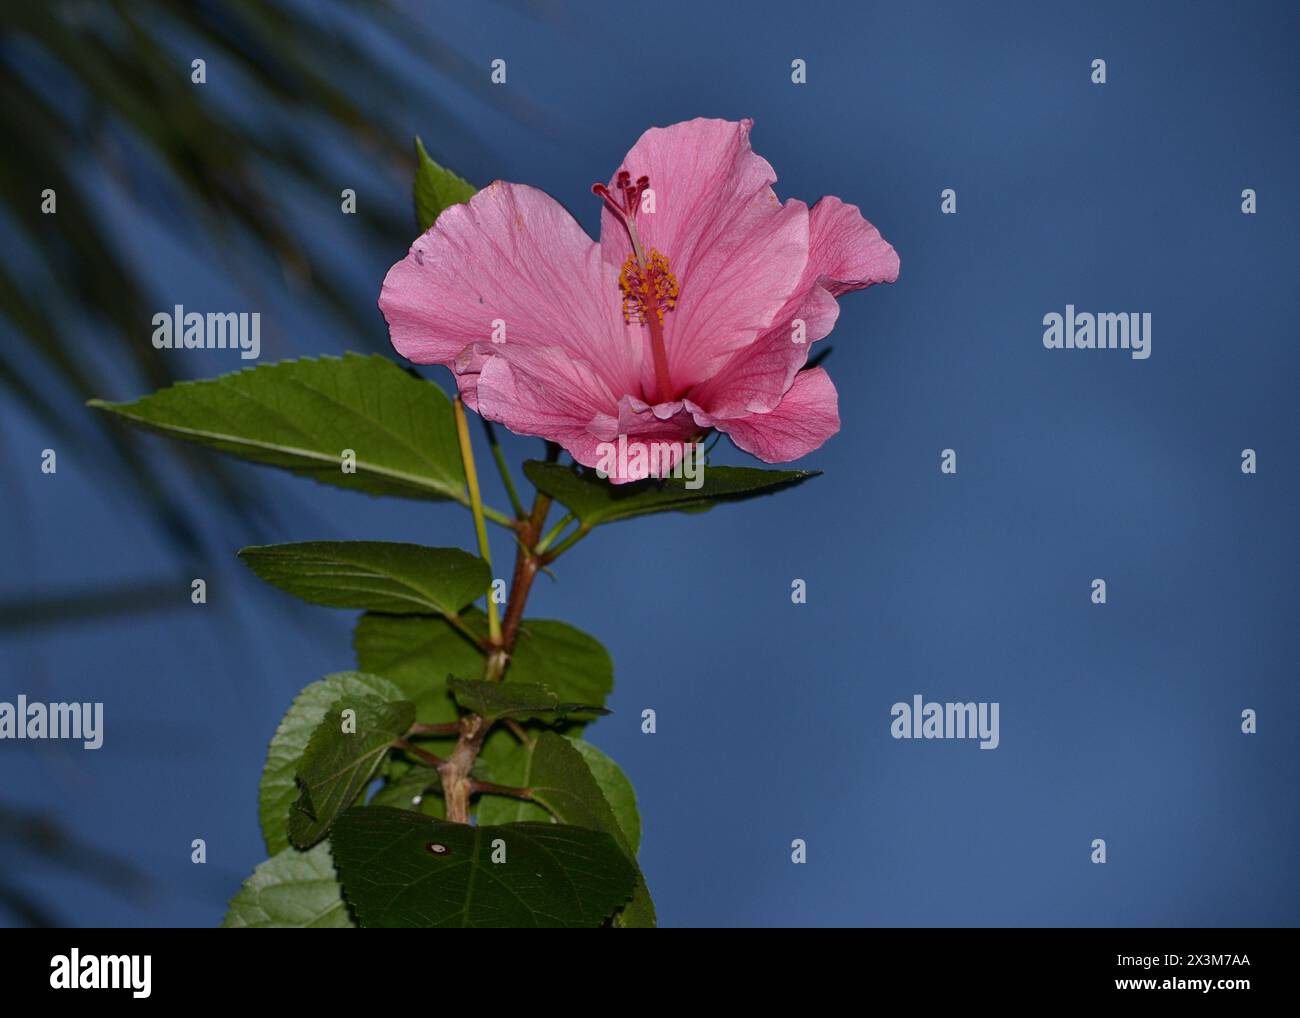 A close-up view of a pink hibiscus flower contrasts with the blue hues of the evening sky and palm tree fronds form a serene backdrop. Stock Photo